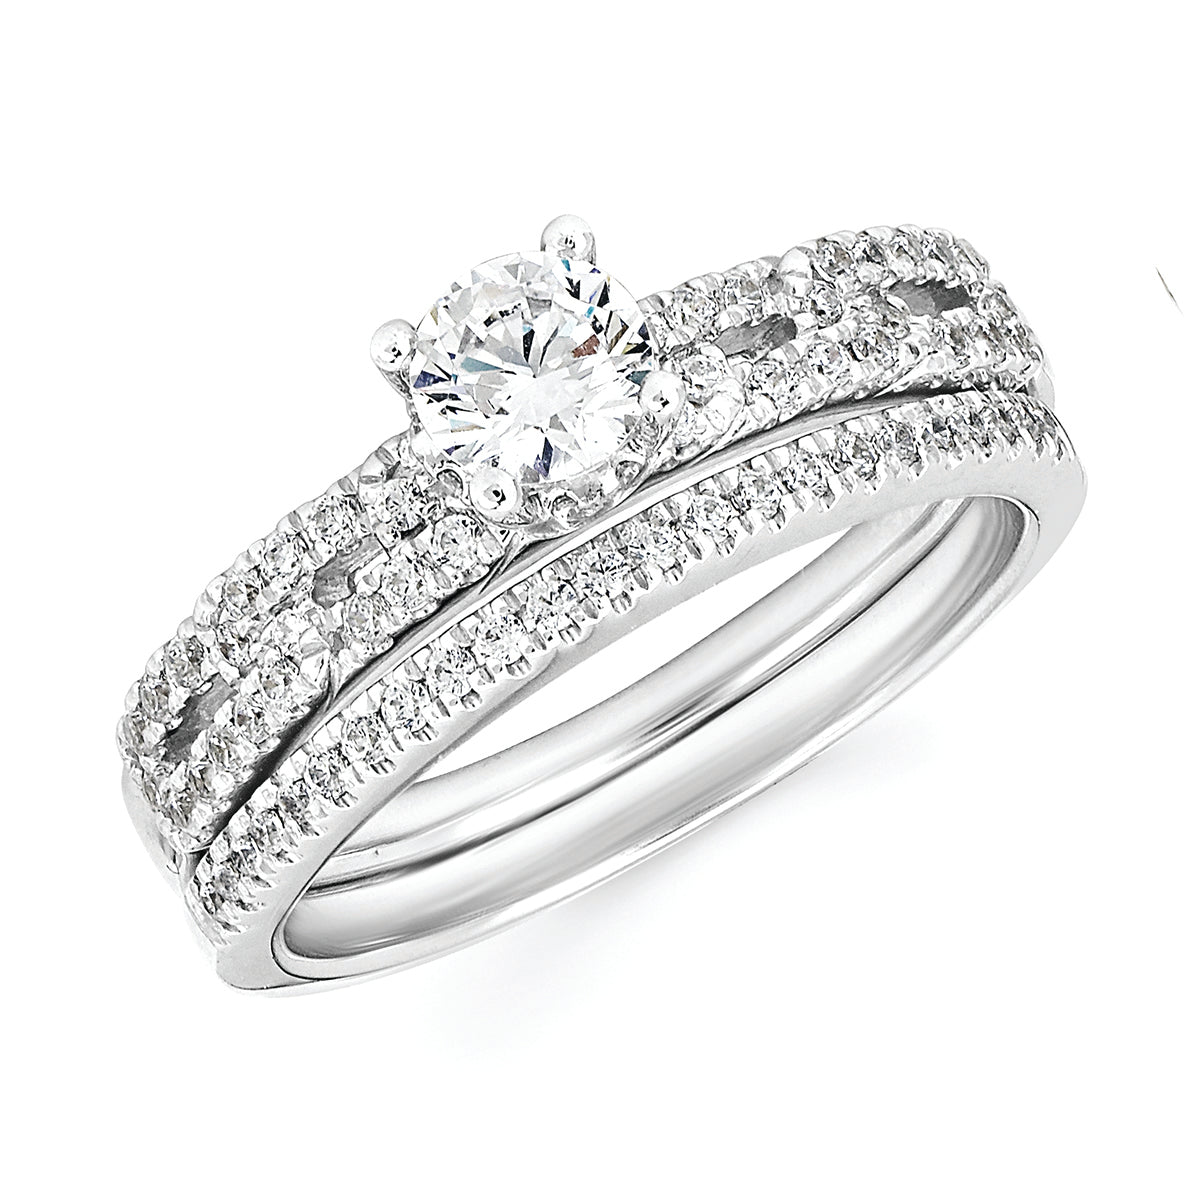 Modern Bridal: 1/4 Ctw. Diamond Semi Mount available for 3/8 Ct. Round Center Diamond in 14K Gold